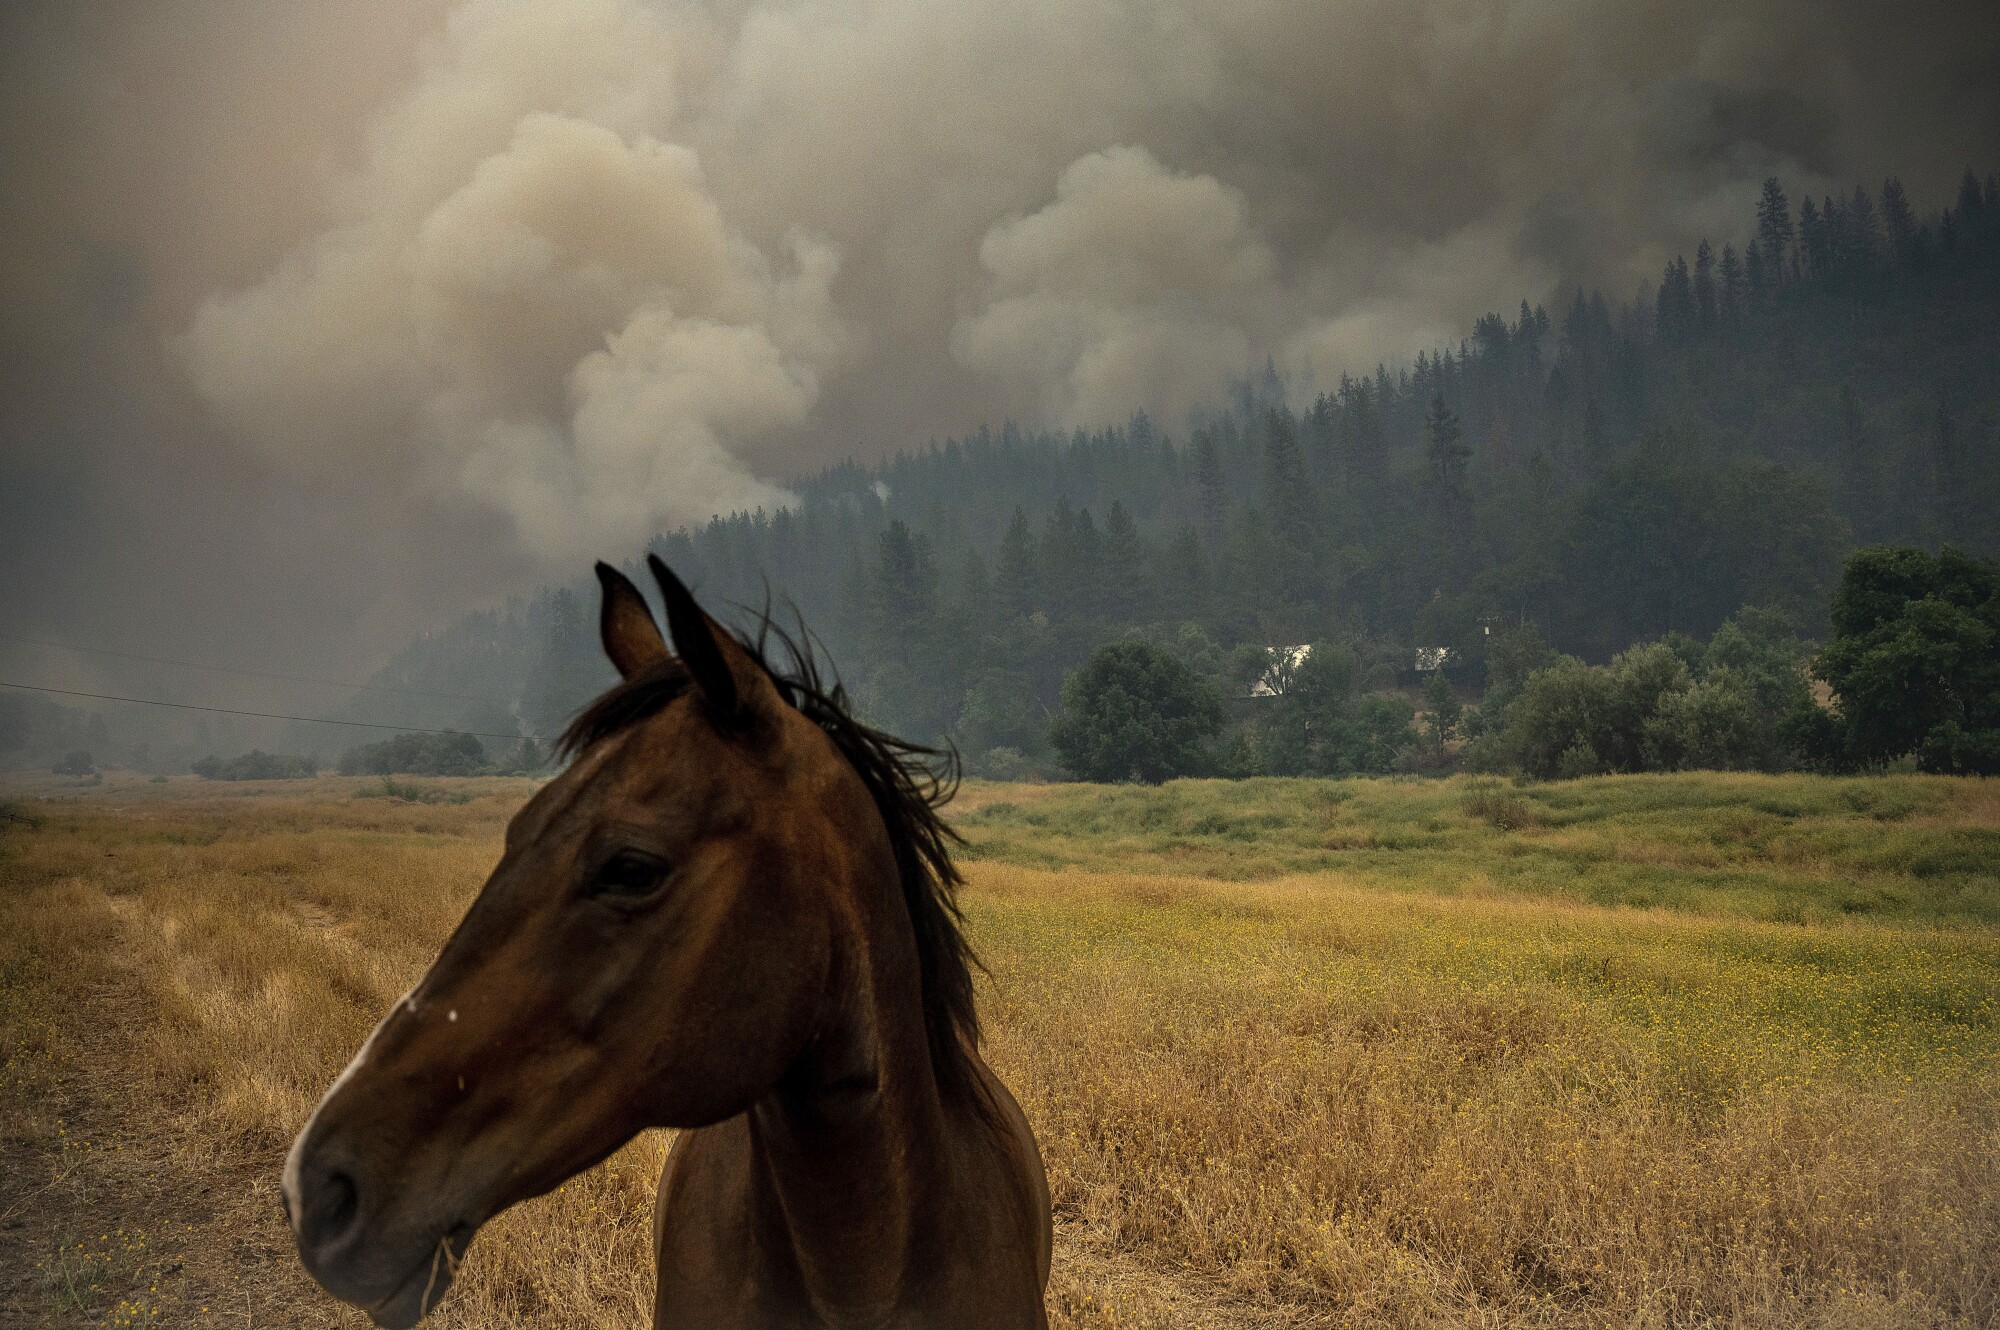 A horse looks up from grazing with smoke in the background.